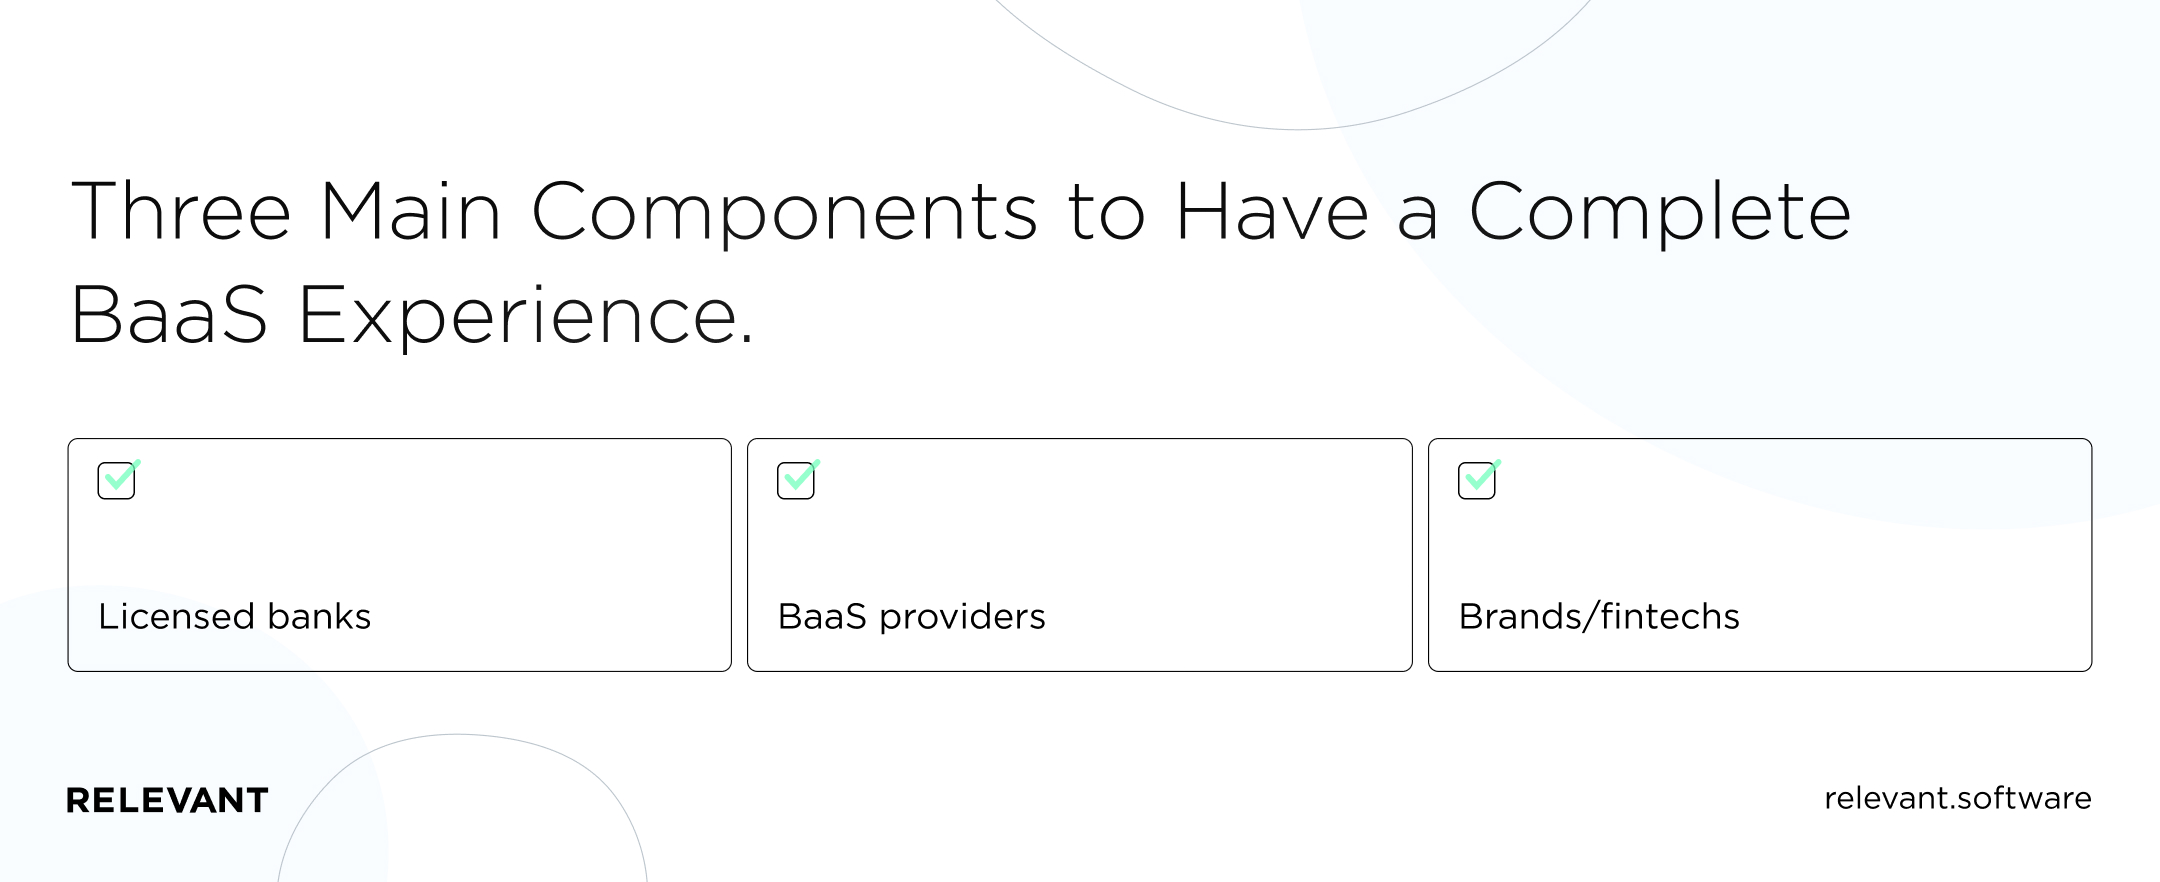 Three main components for a complete BaaS experience
- Licensed banks
- BaaS providers
- Brands/fintechs